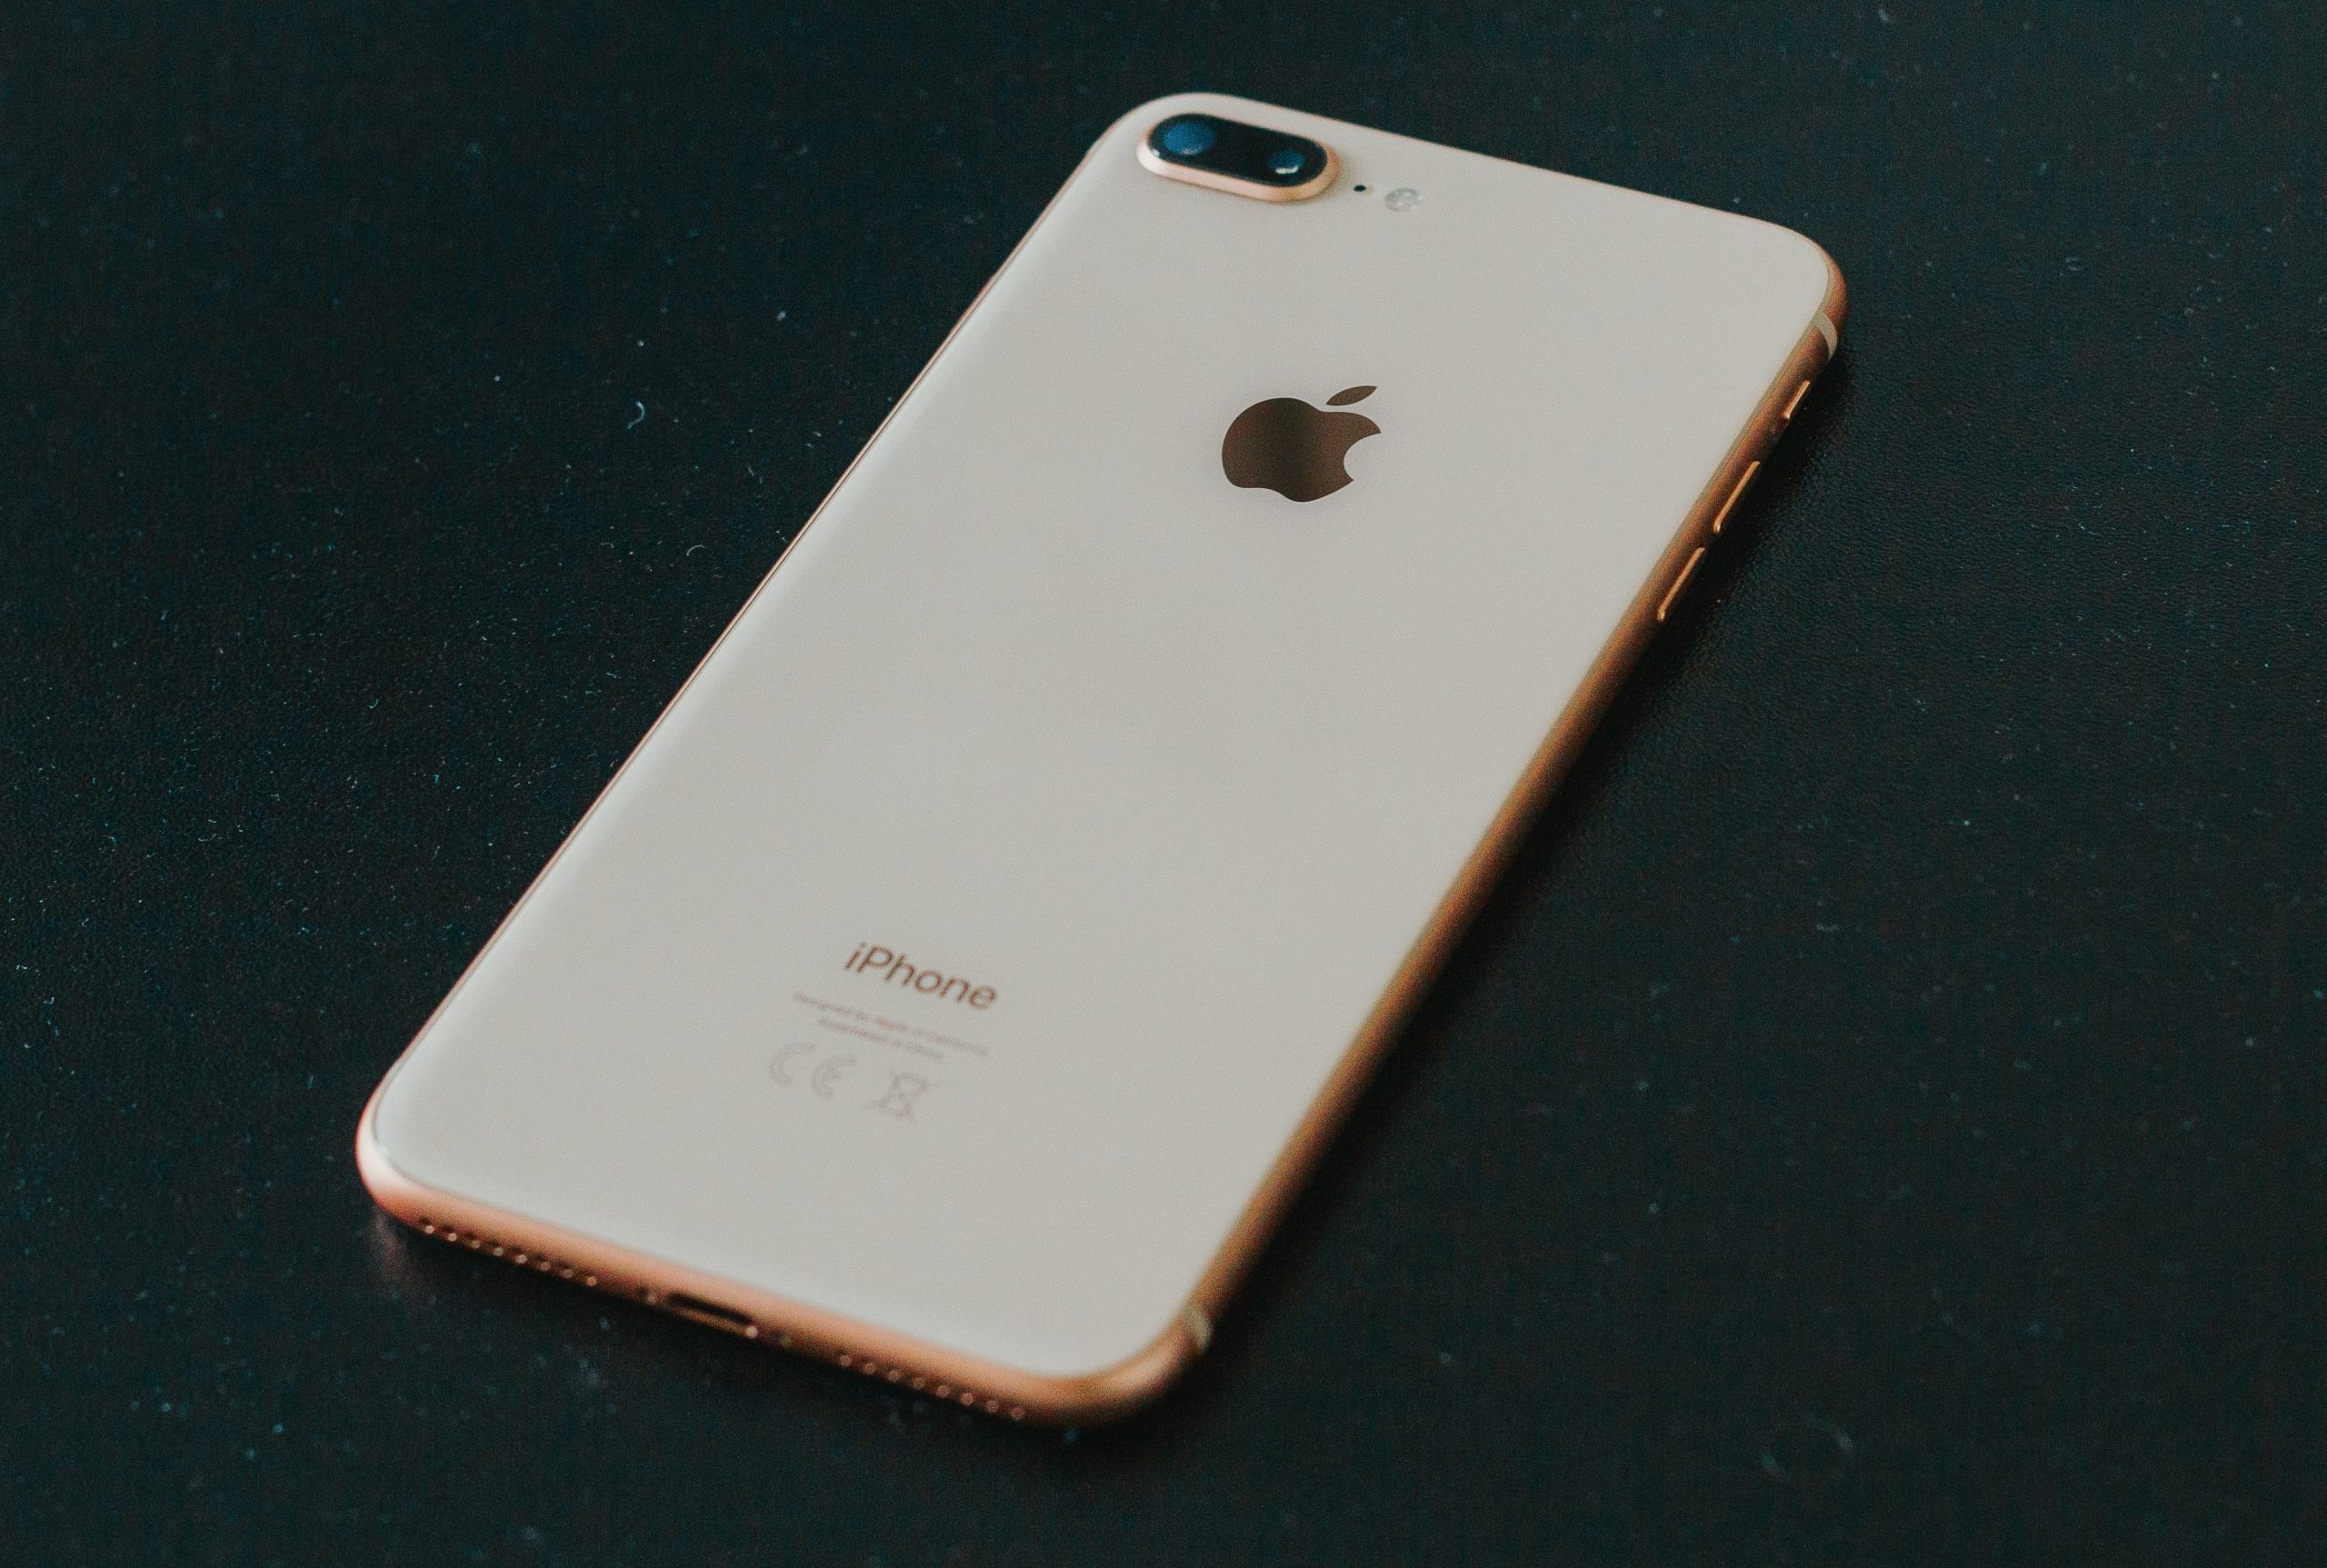 How much can i sell my iphone 8 plus for How Much Does An Iphone 8 Plus Cost Swappa Blog